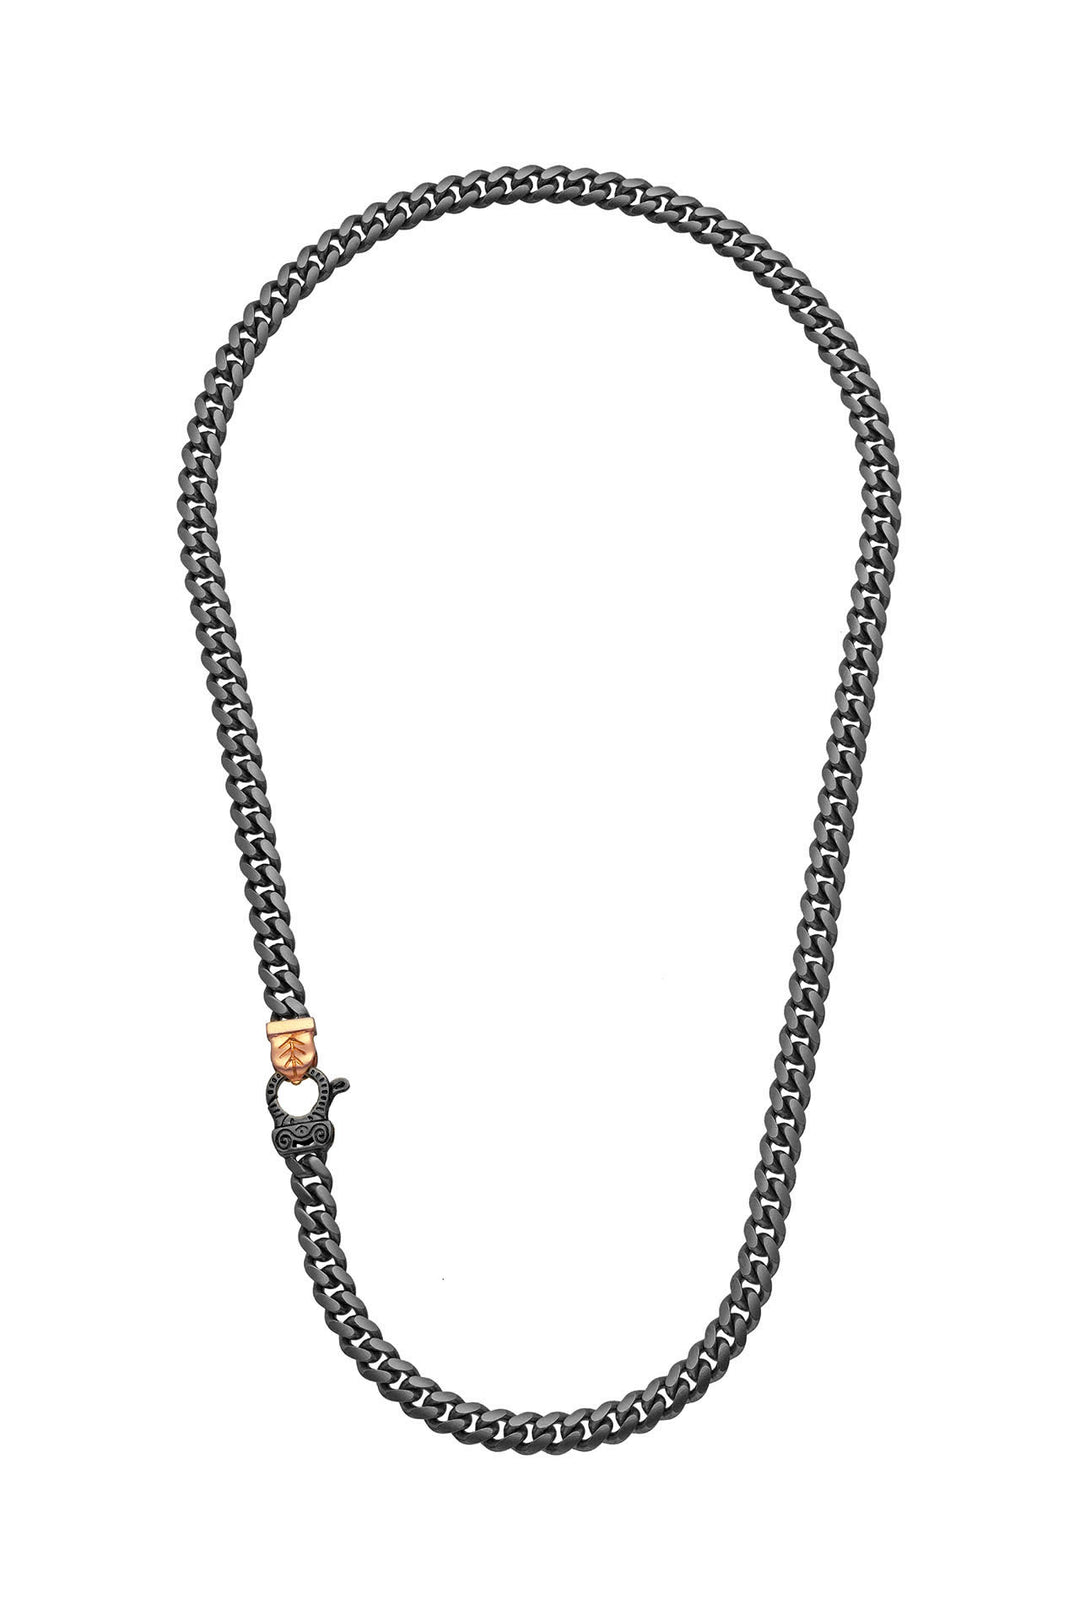 ULYSSES 18K Rose Gold Vermeil and Oxidized Chain Necklace